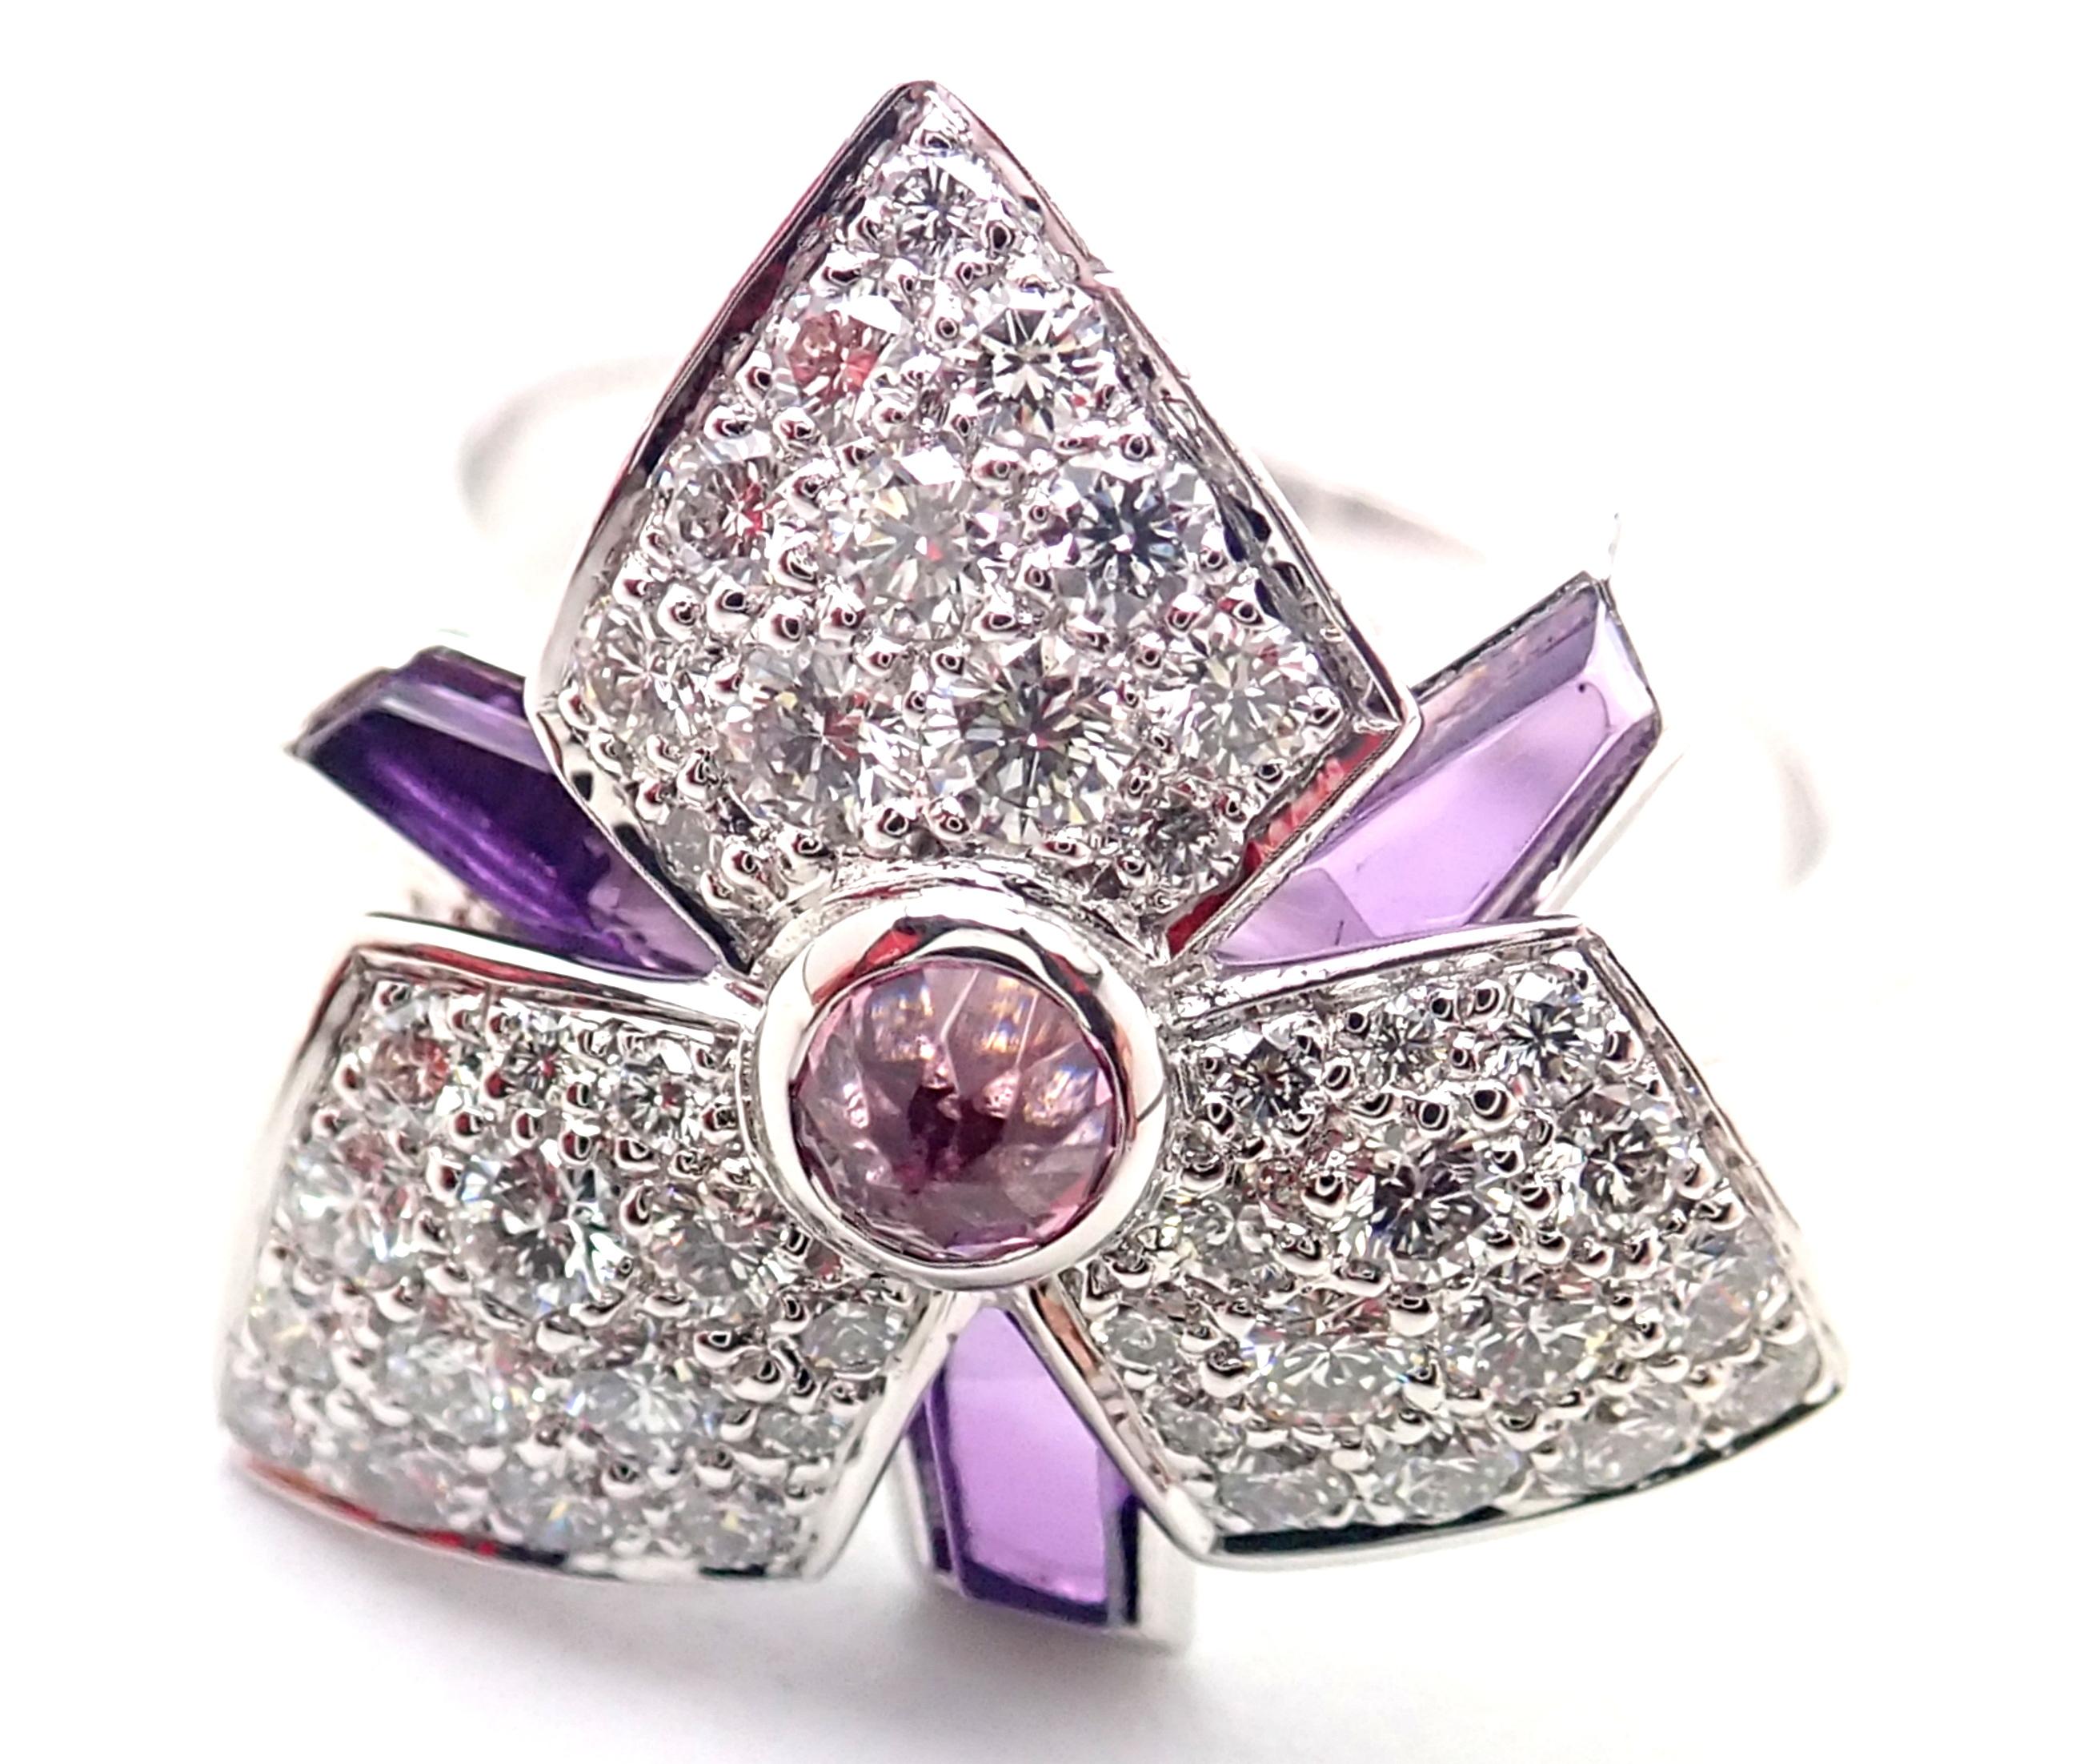 18k White Gold Diamond Amethyst Caresse D'orchidées Orchid Flower Ring by Cartier.
With Round brilliant cut diamonds VS1 clarity, E color total weight approx. .52ct
Amethysts
Details:
Size: European 49, US 4 3/4
Weight: 6.1 grams
Width: 